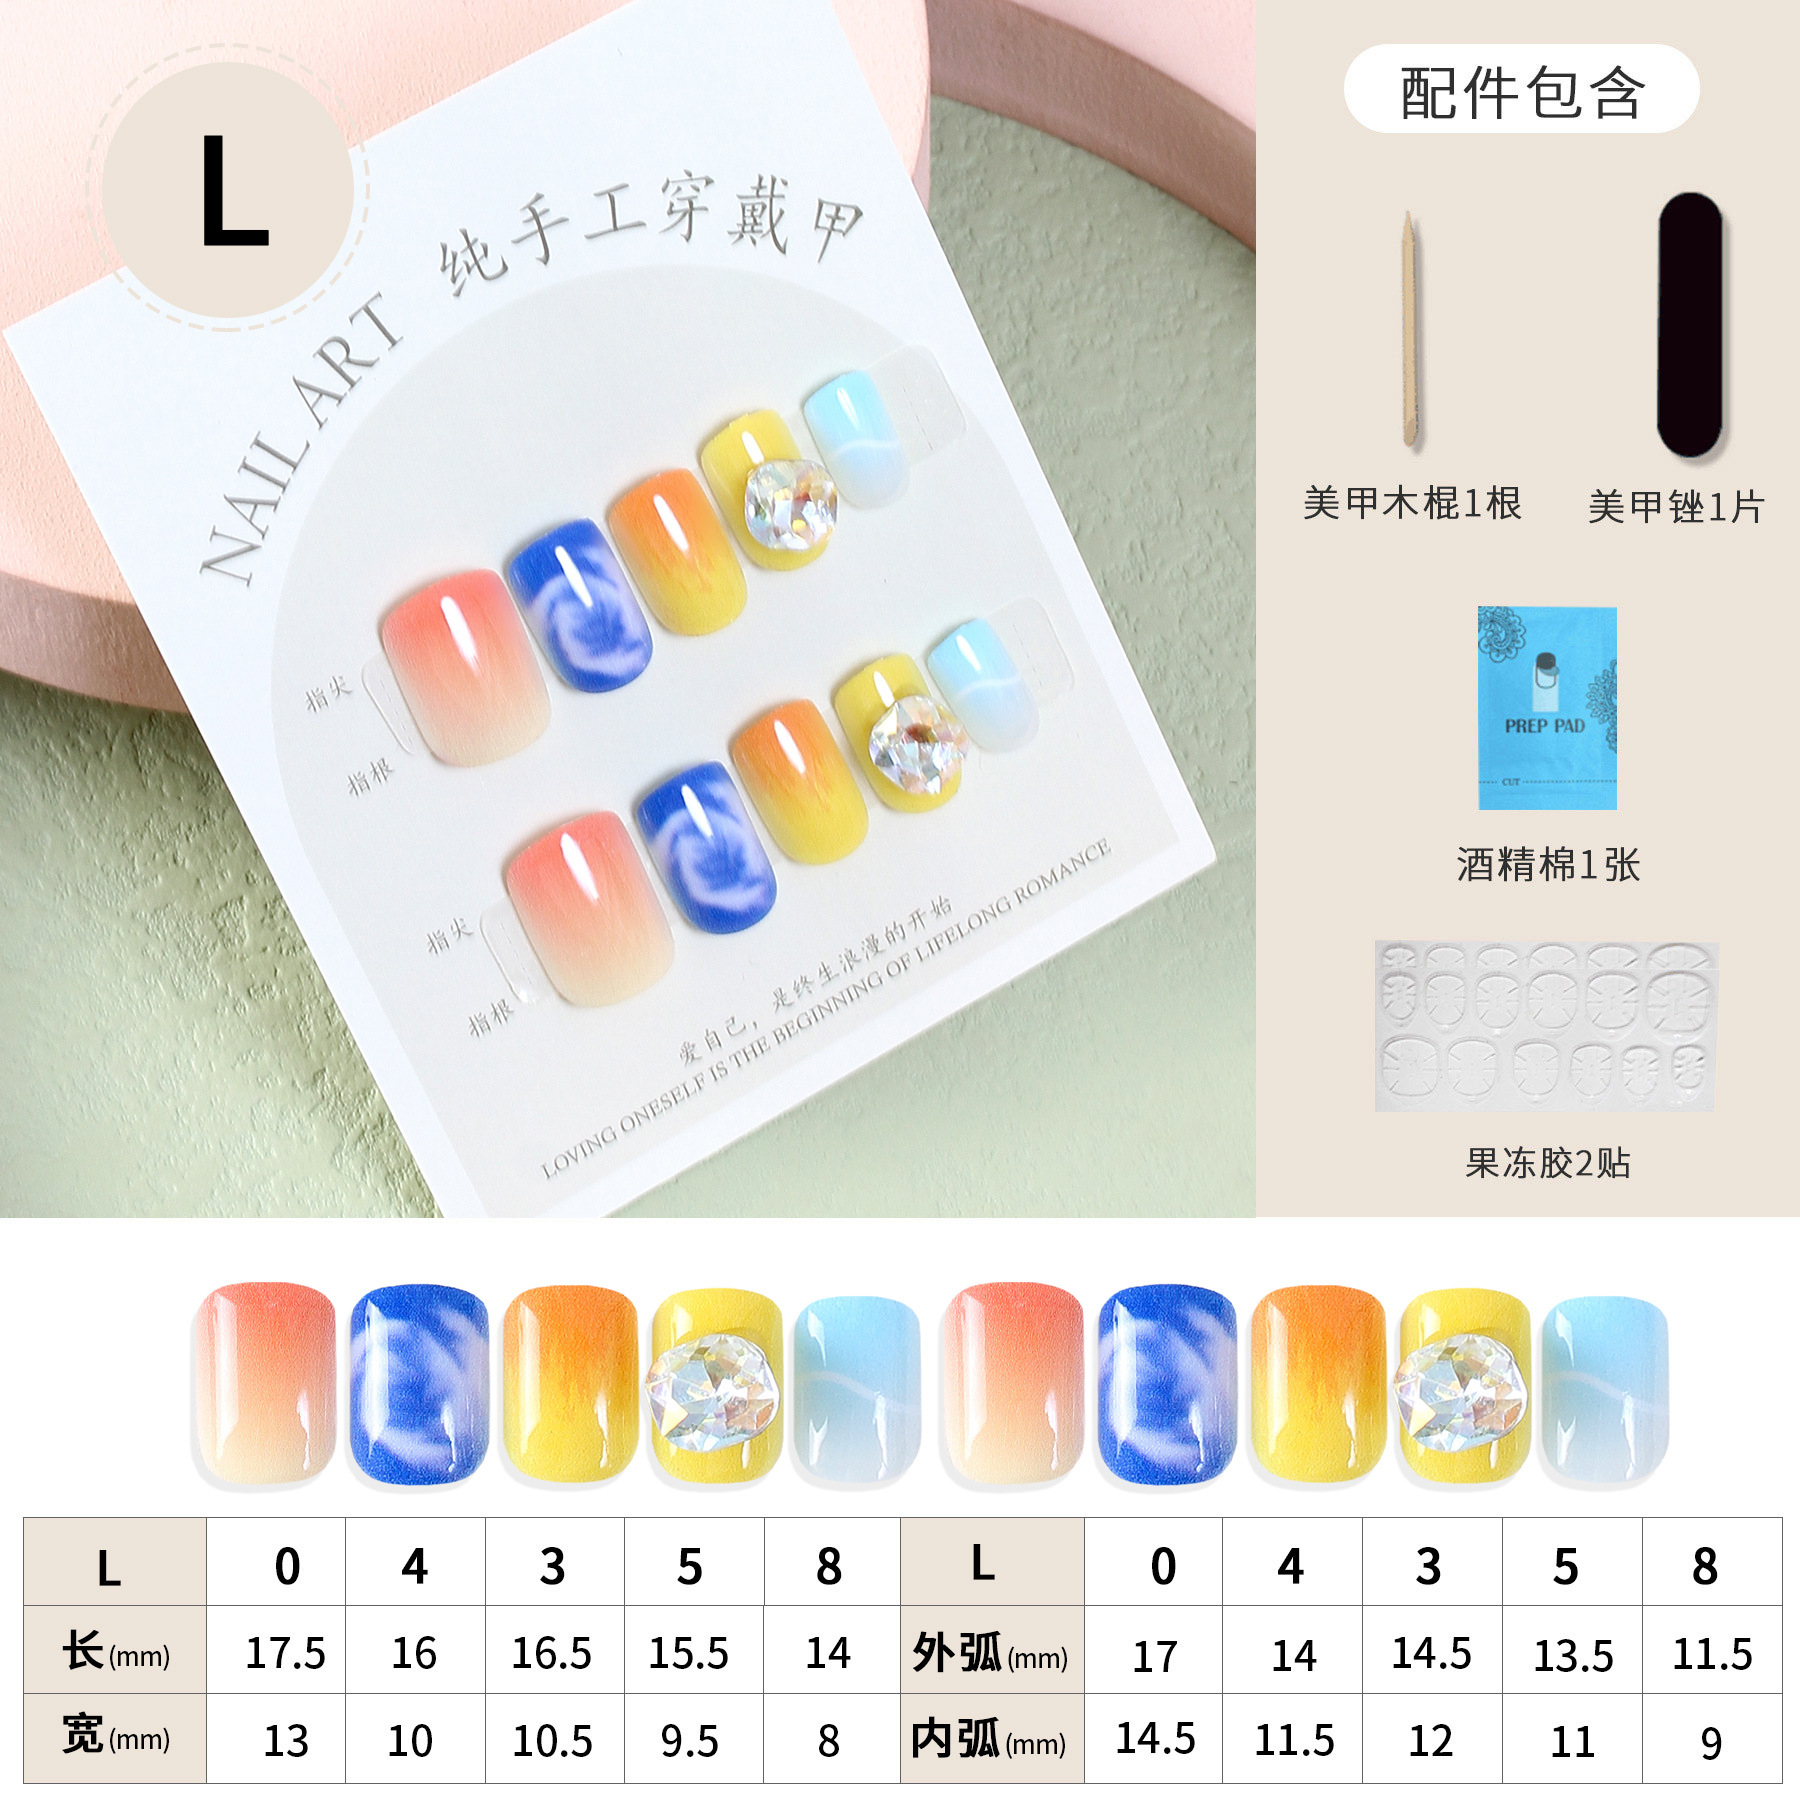 Hot-Selling New Arrival Handmade Wear Armor Sweet Small and Short Armor Fresh Blue Sky White Clouds Fake Nails Nail Stickers in Stock